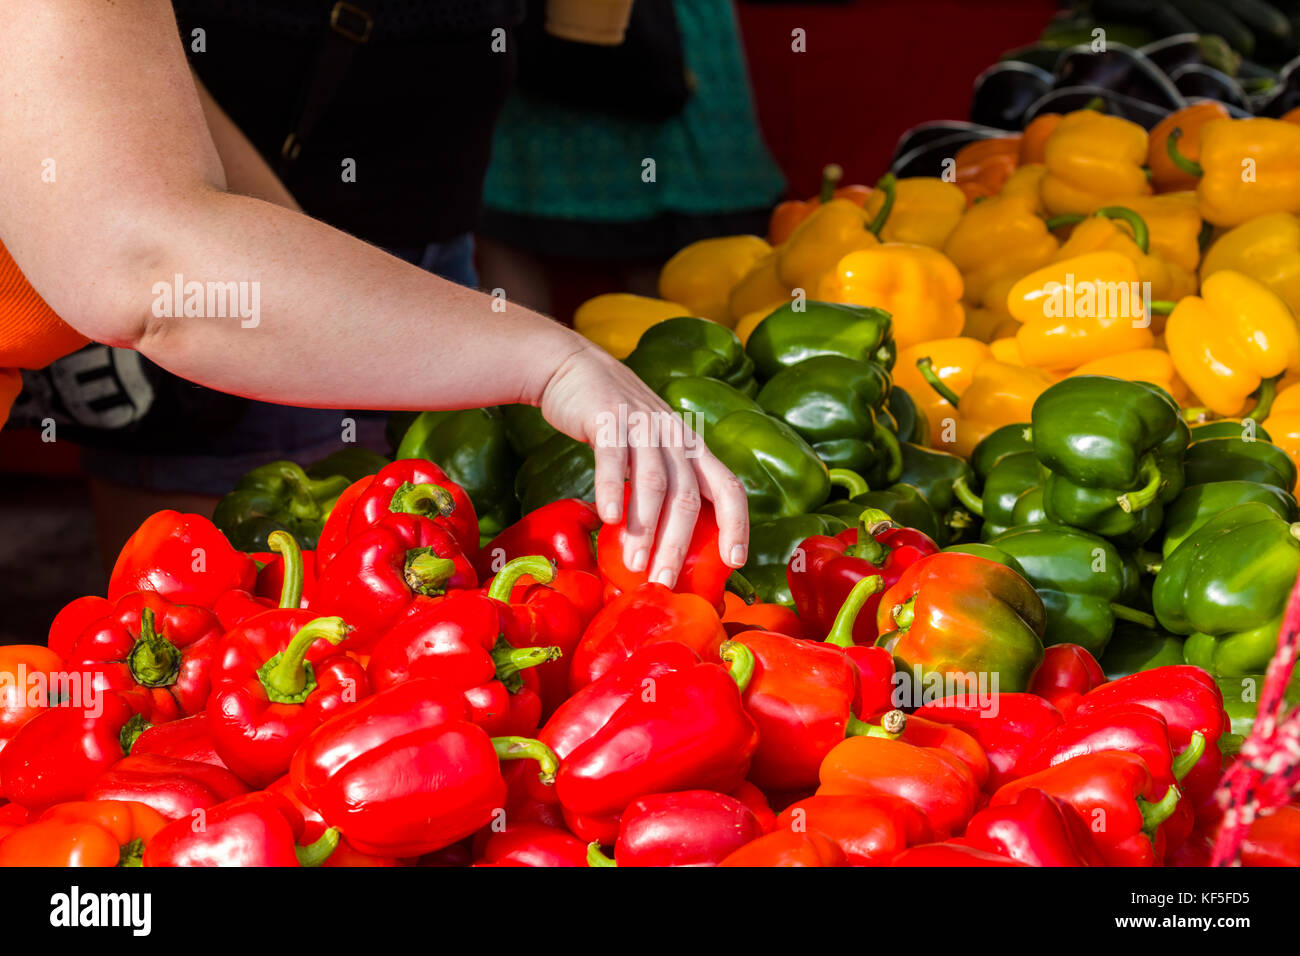 Hand reaching for a pepper in a pile of red, green and yellow peppers in a market Stock Photo